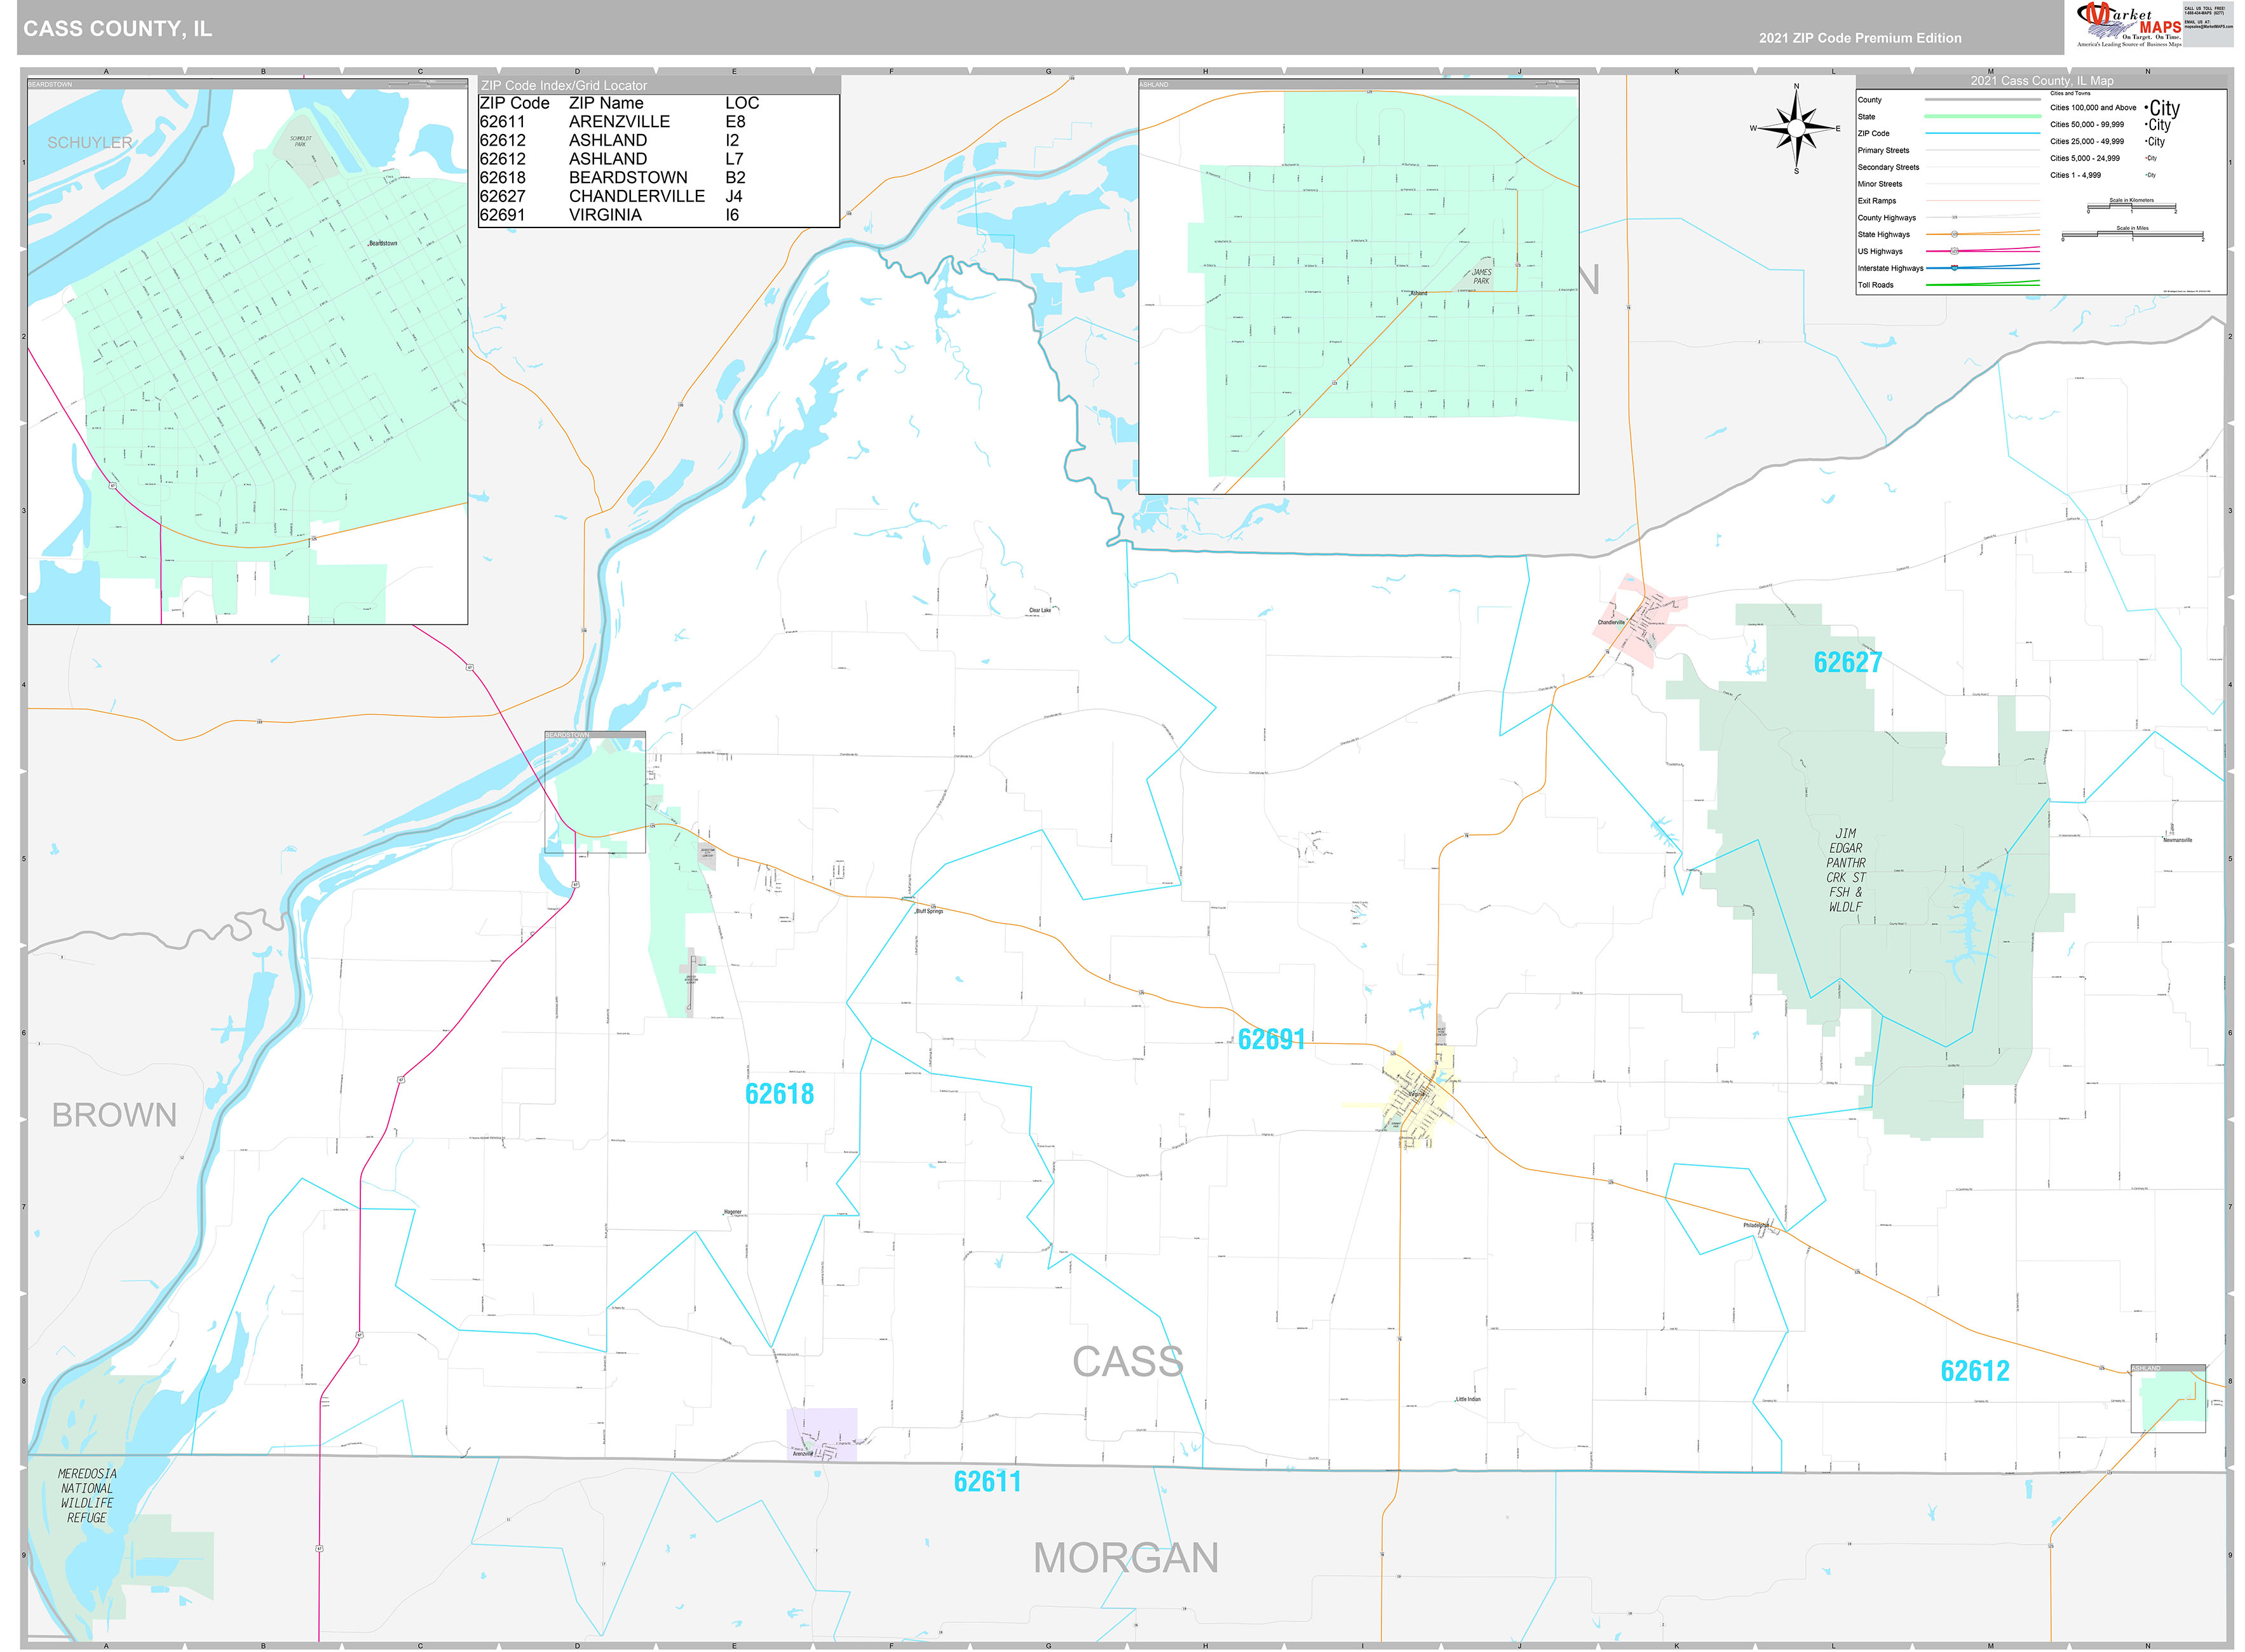 Cass County Wall Map Premium Style - Bank2home.com